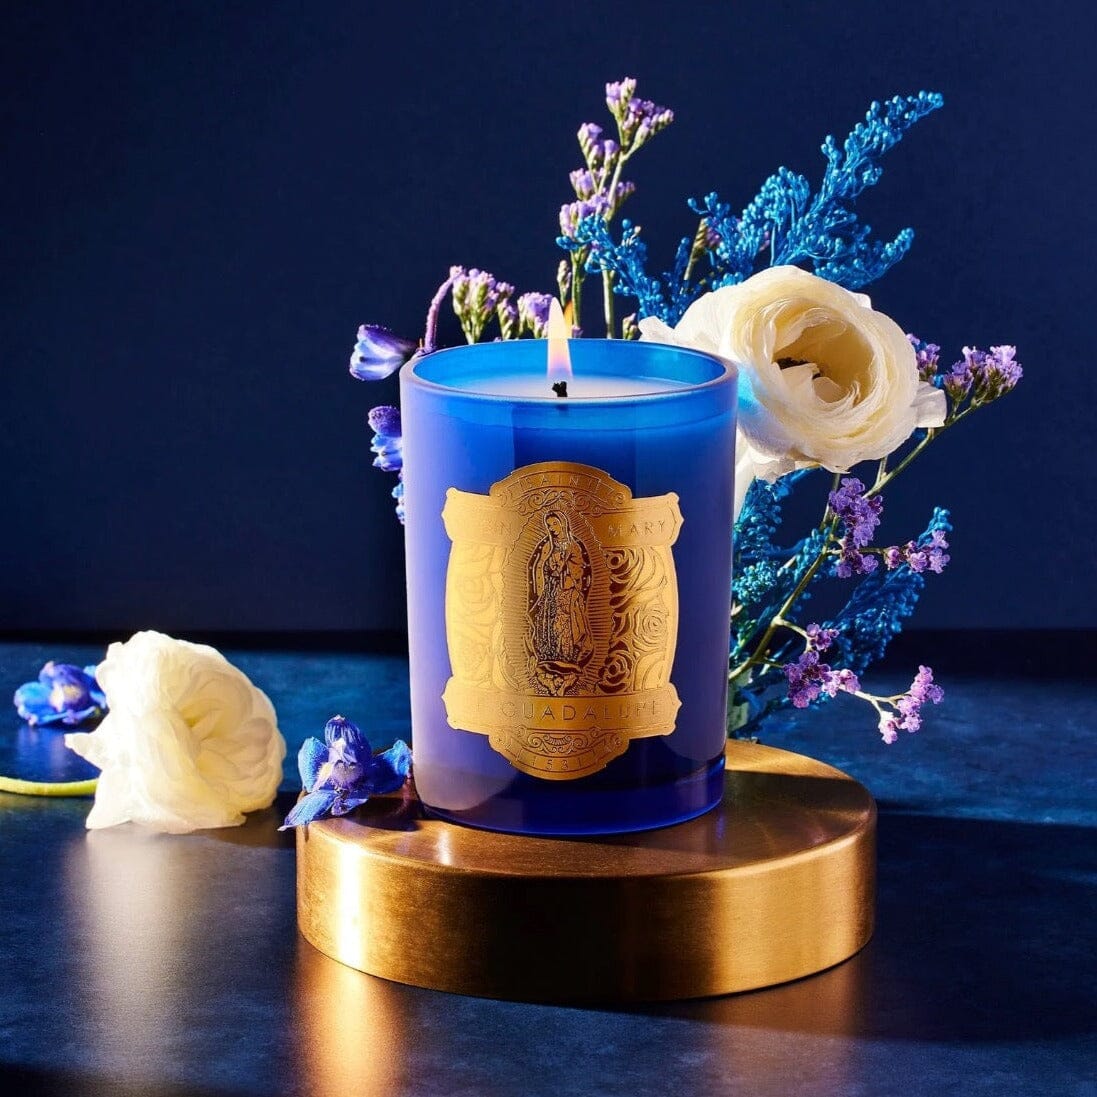 Virgin Mary of Guadalupe Special Edition Candle by SAINT CANDLES with Flowers on Pedestal